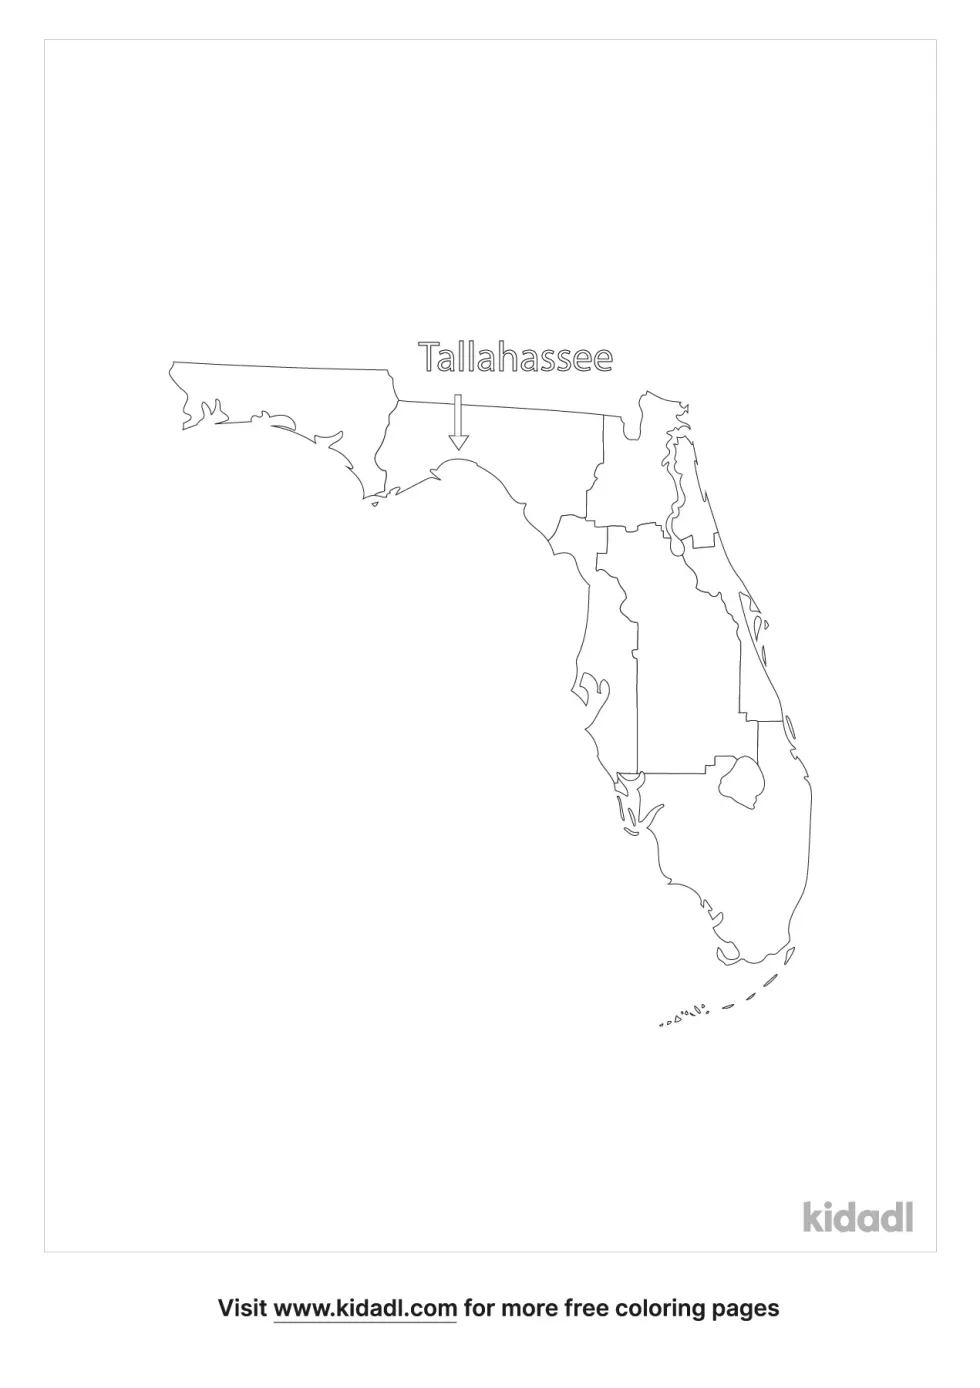 Tallahassee Map Coloring Page